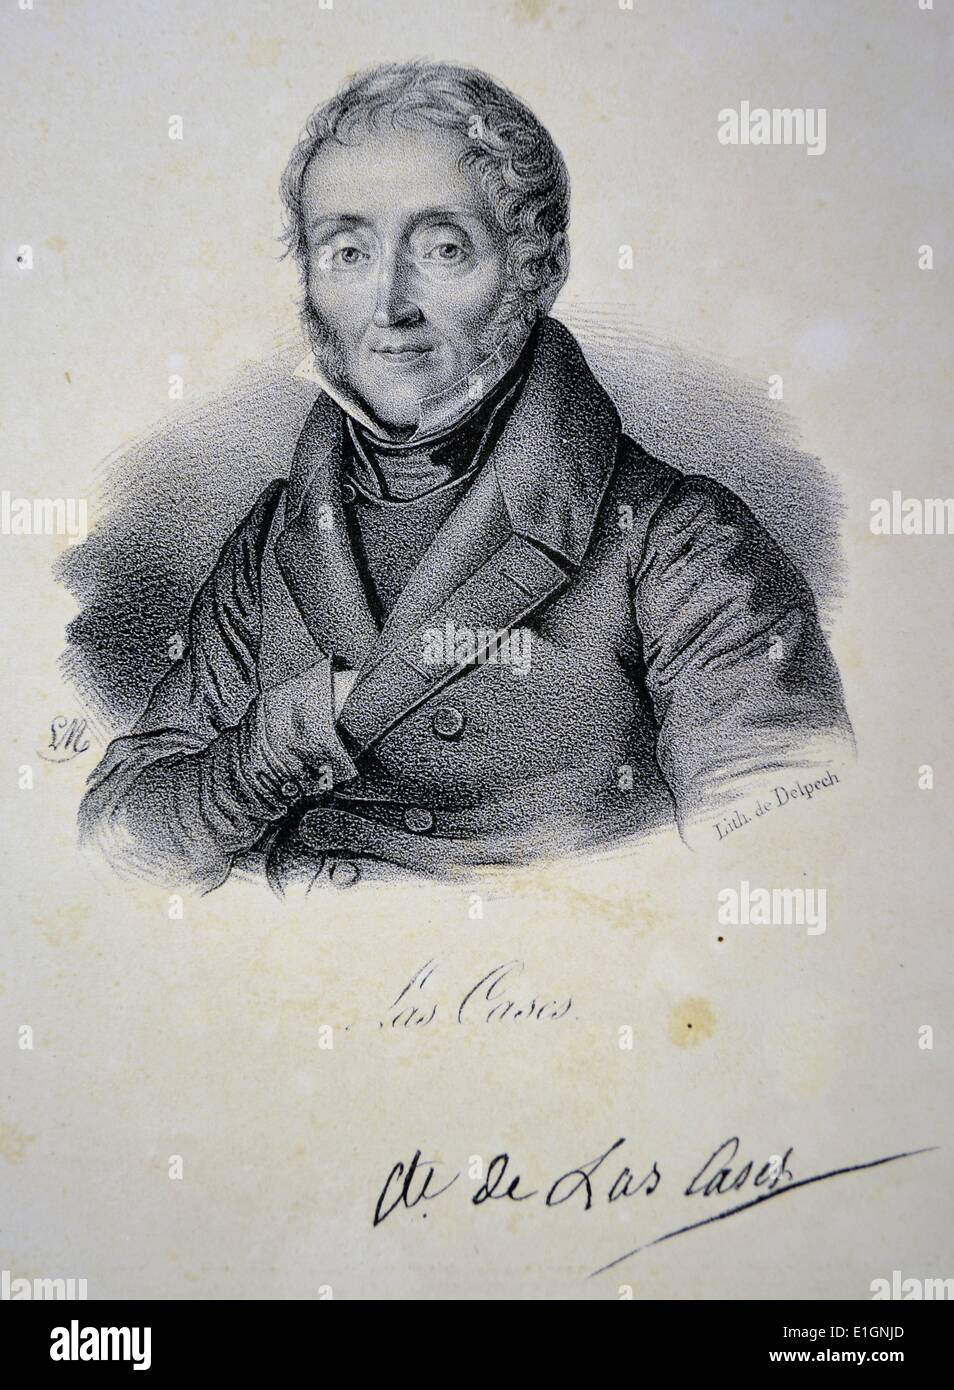 Emmanuel, comte de las Cases (1766-1842) French writer and atlas-maker.  Published his famous atlas while in exile in London in 1801. Lithograph,  Paris, c1840 Stock Photo - Alamy